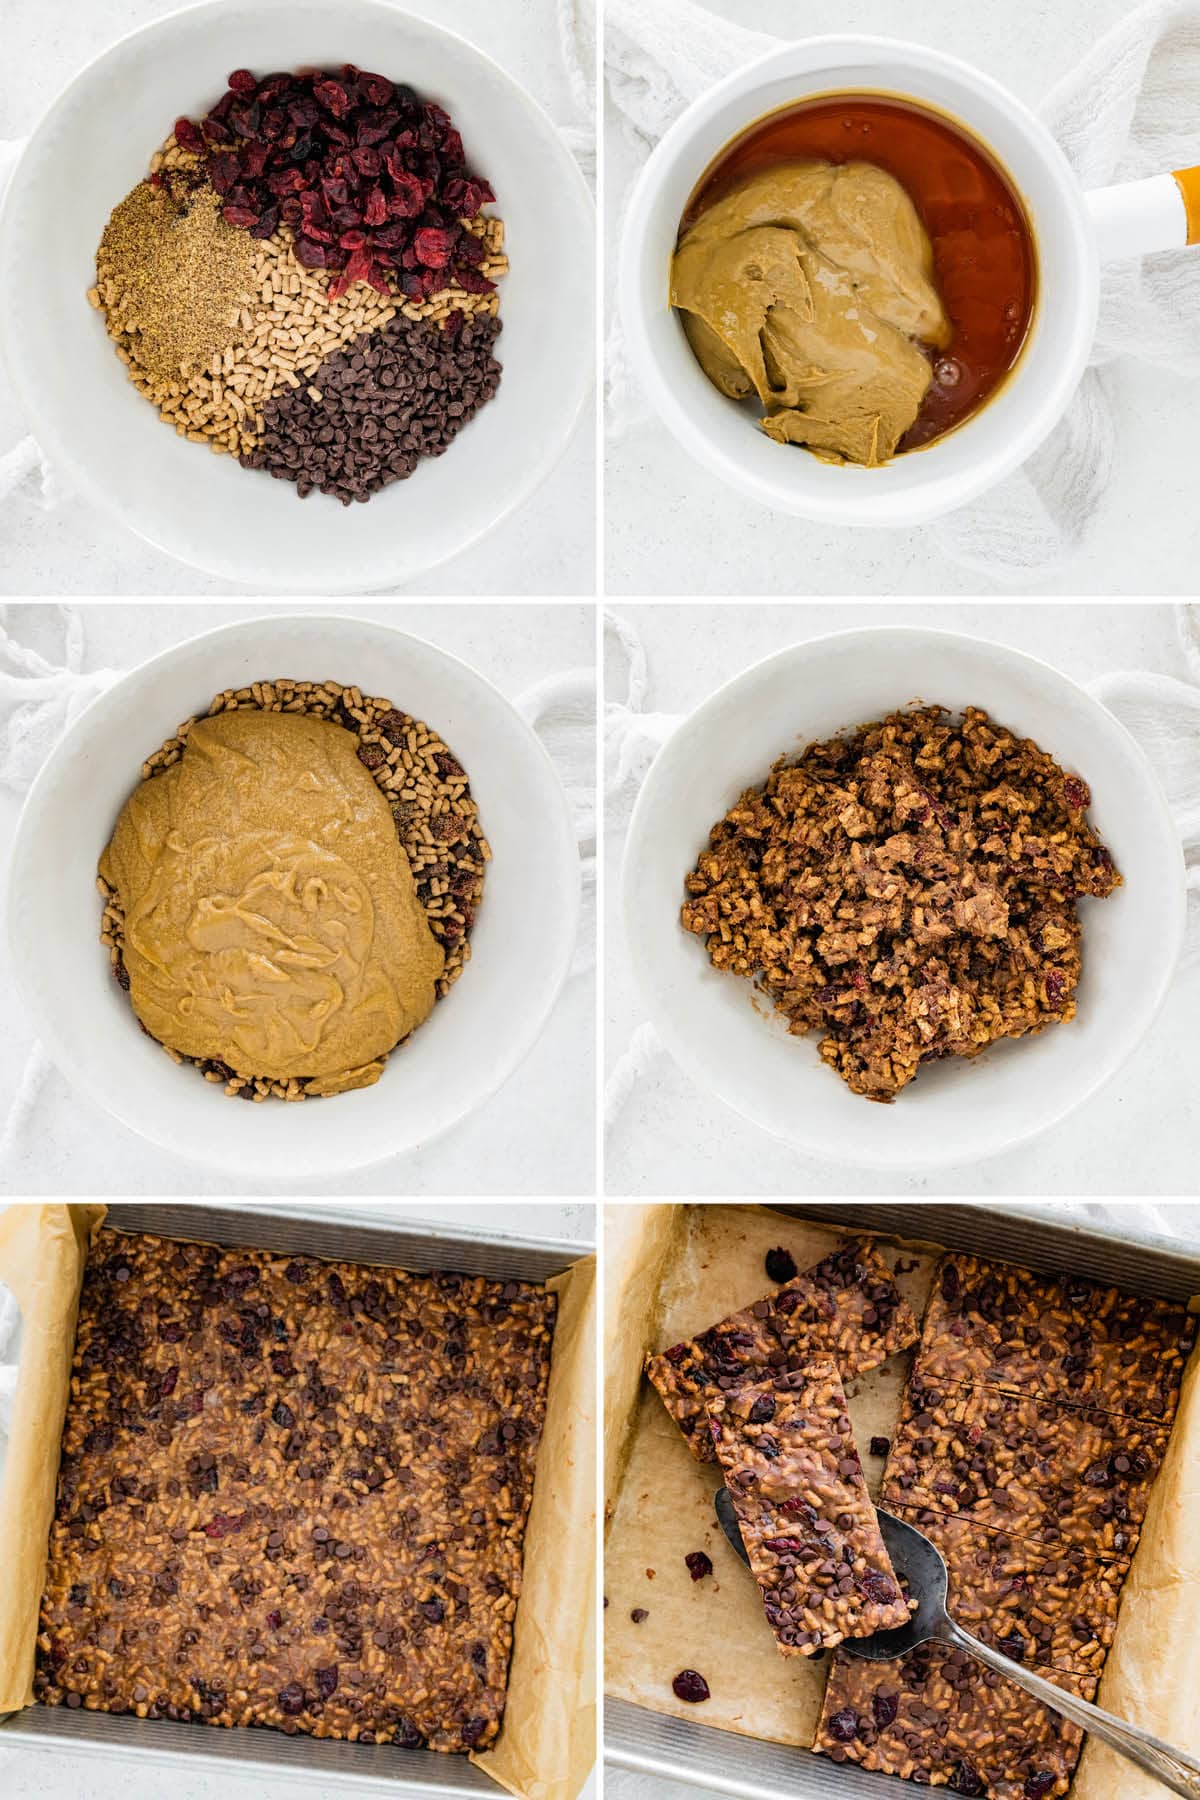 Collage of 6 images showing how to make No Bake High Fiber Bars: mixing the cereal, cranberries and chocolate chips with a honey Sunbutter mixture and then pressing into a pan to set and cut into bars.